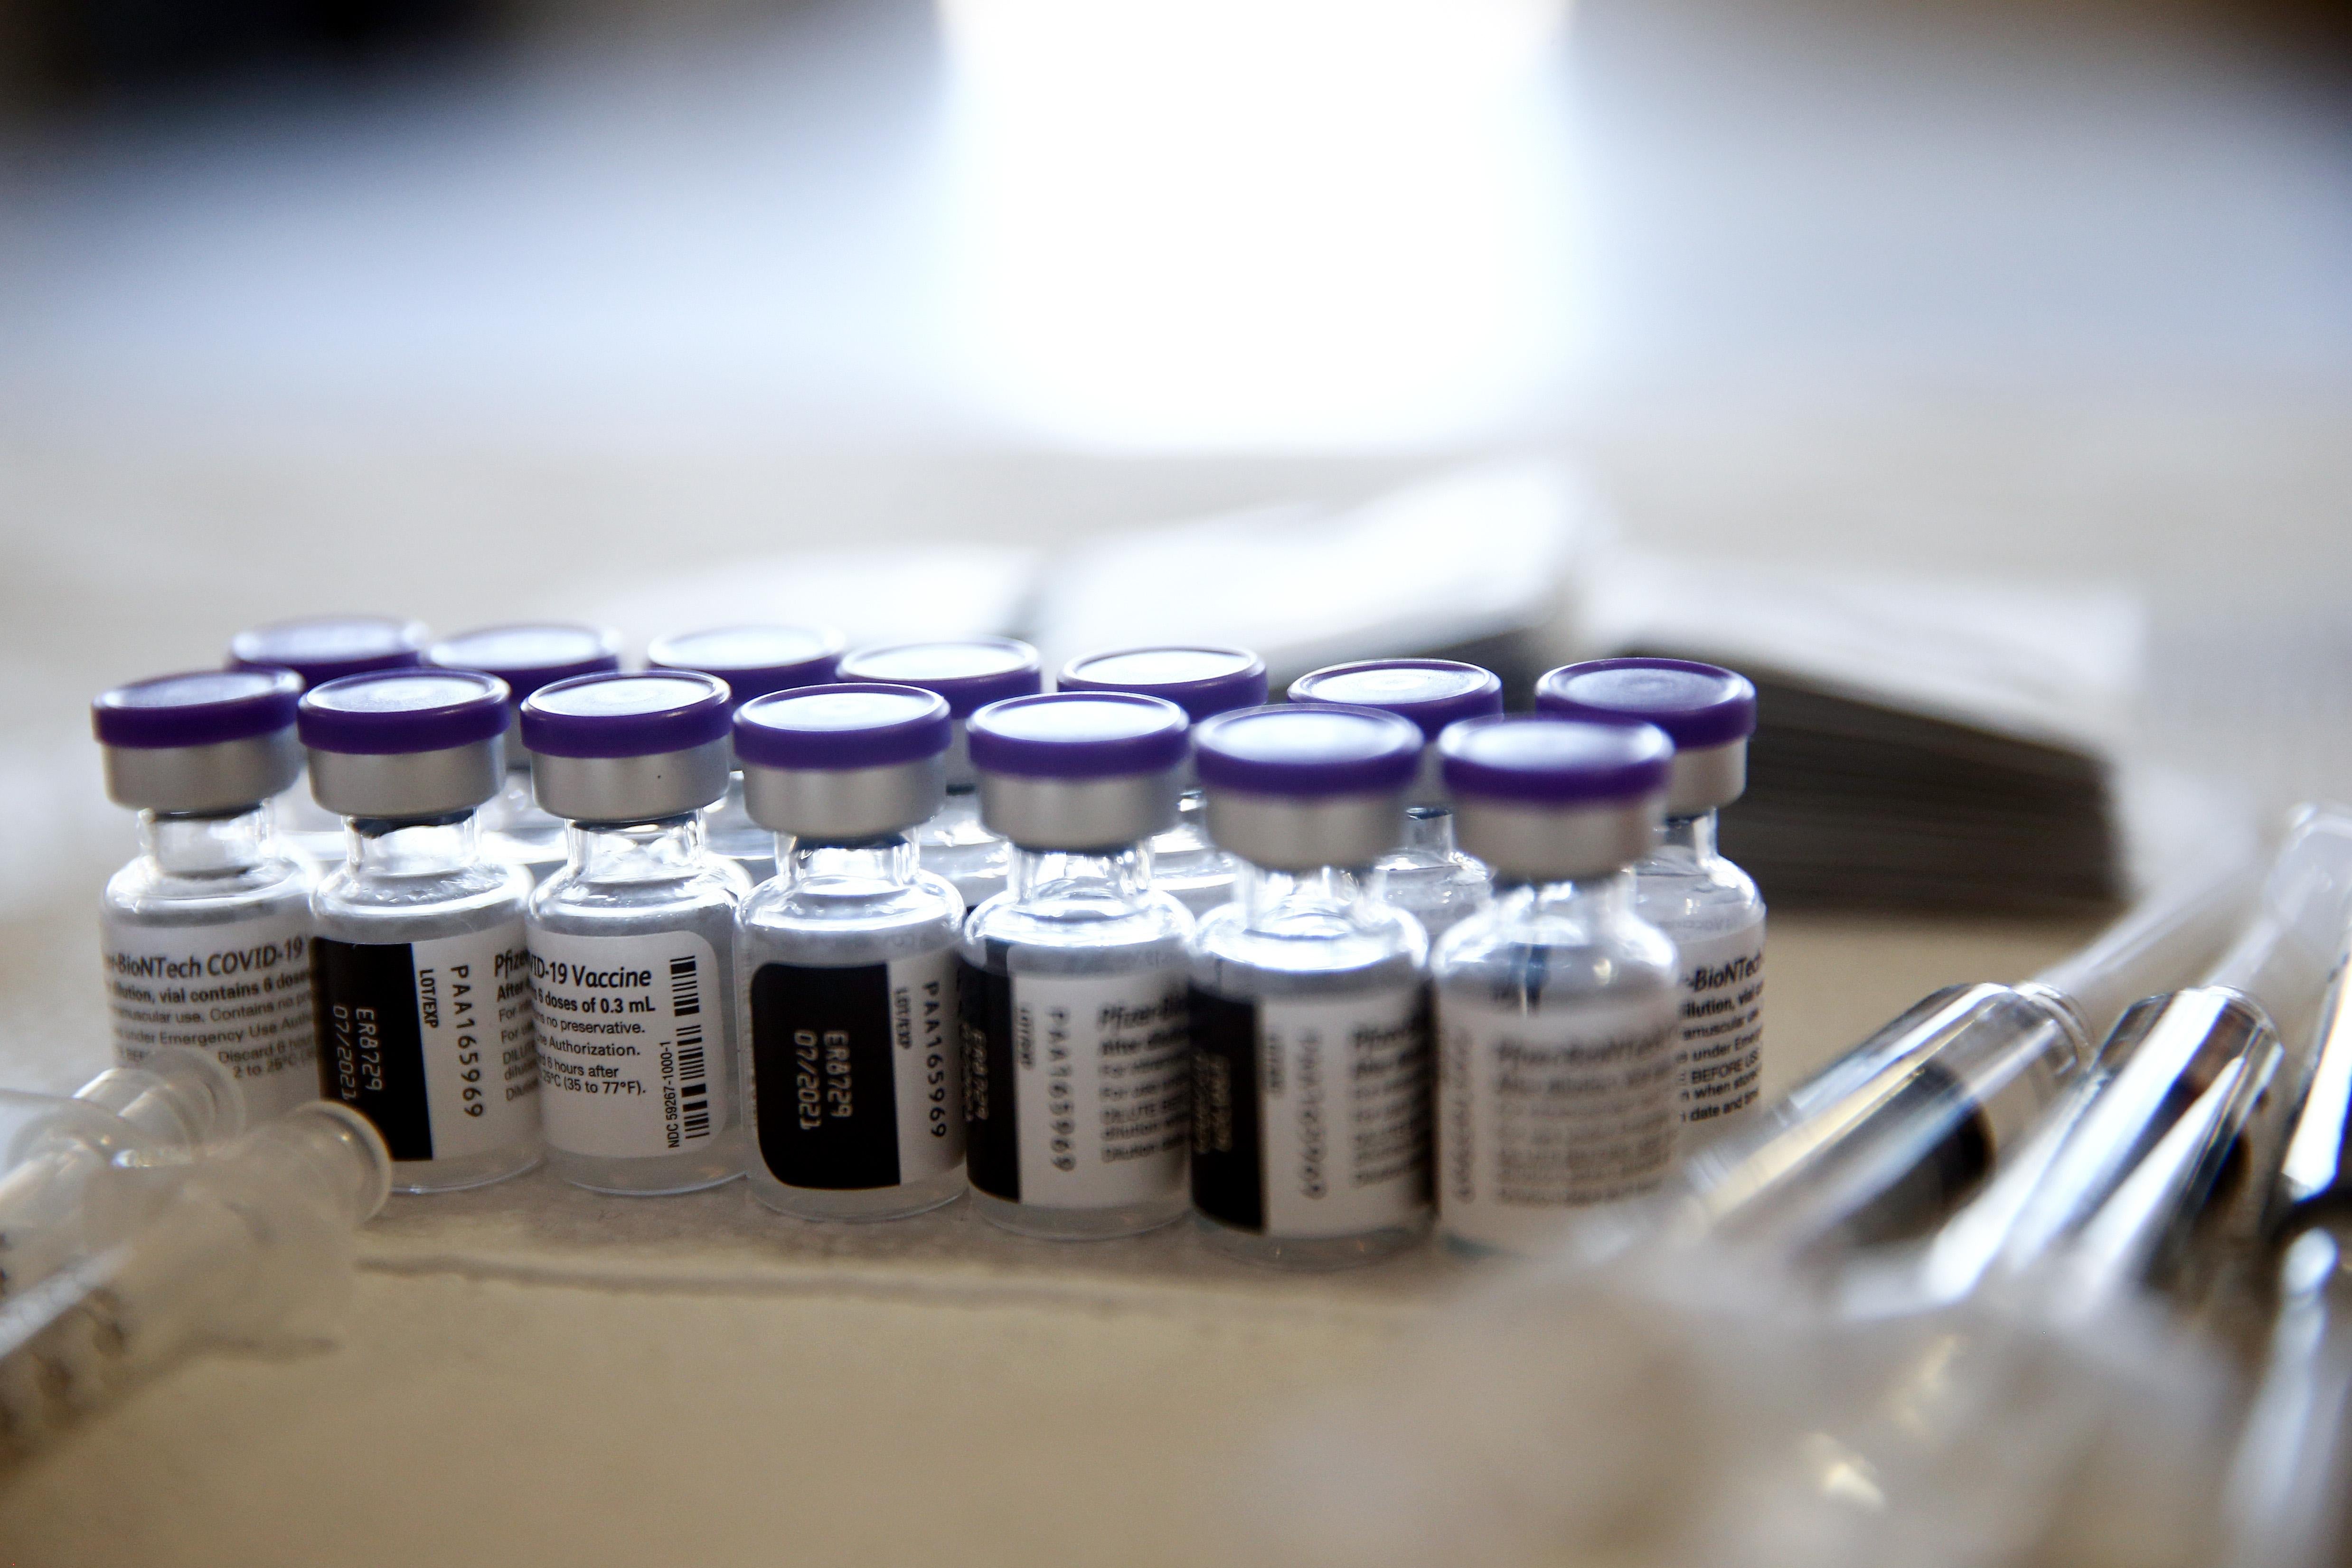 Vials containing doses of the Pfizer COVID-19 vaccine are viewed at a clinic targeting minority community members at St. Patrick's Catholic Church on April 9, 2021 in Los Angeles, California. 